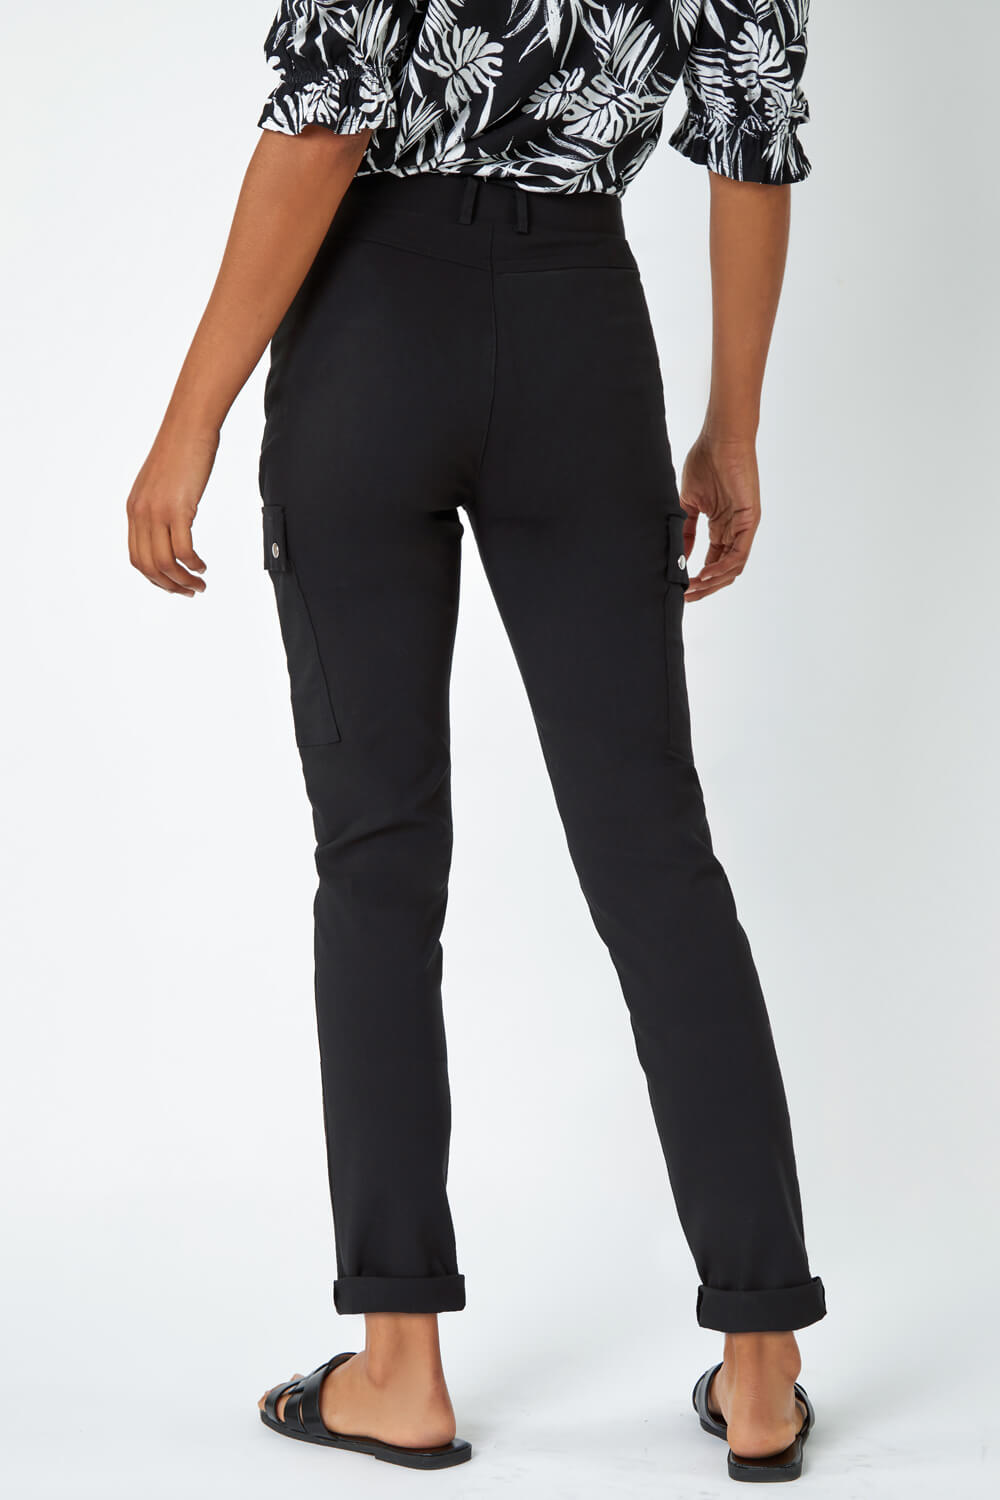 Black Turn Up Stretch Cargo Trousers, Image 4 of 5